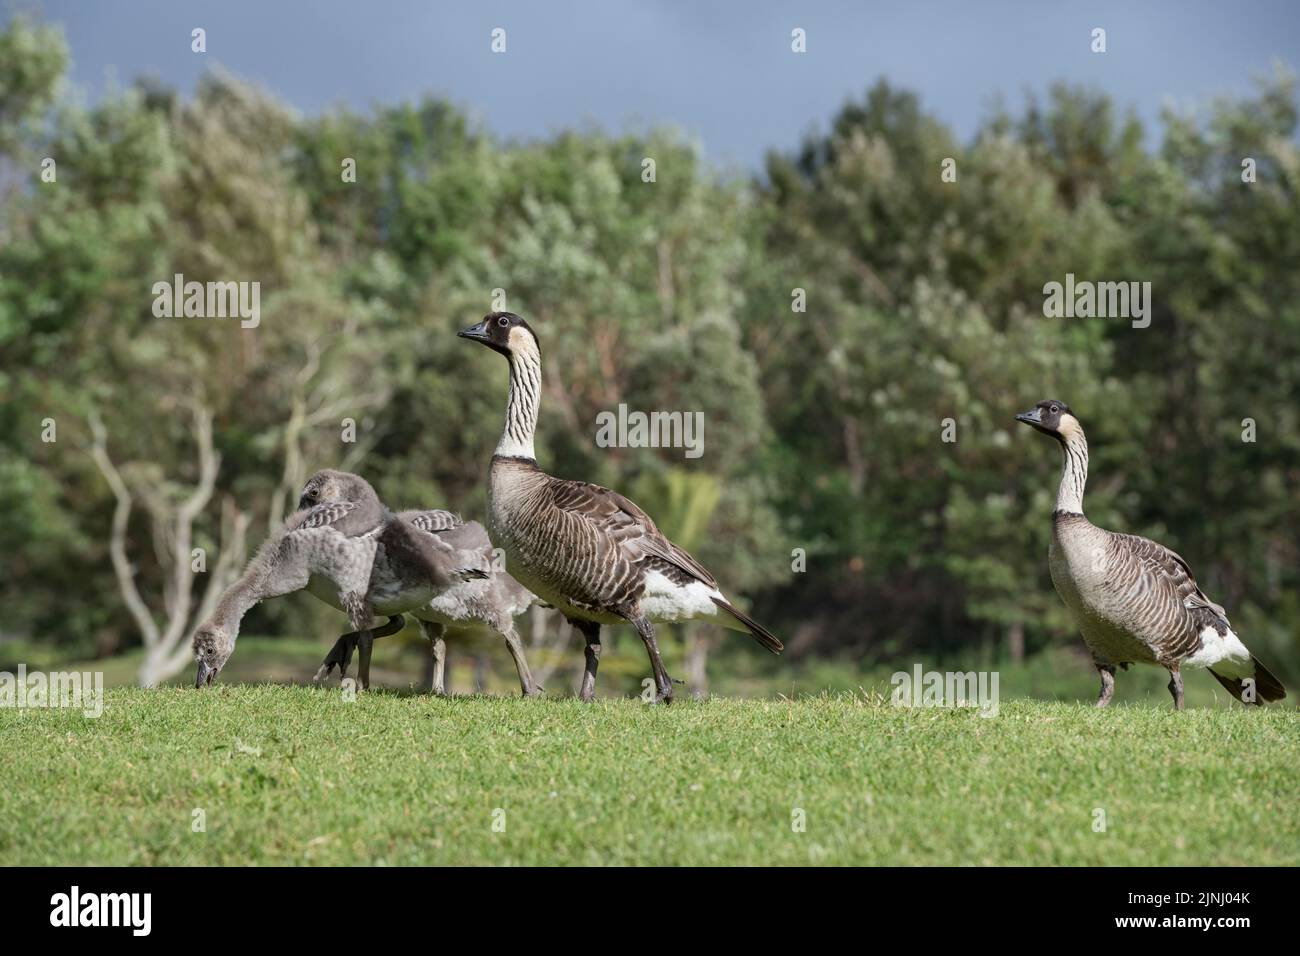 nene or Hawaiian goose, Branta sandvicensis ( endemic species ), the world's rarest goose, adults with large chicks or goslings, North Kona, Hawaii Stock Photo